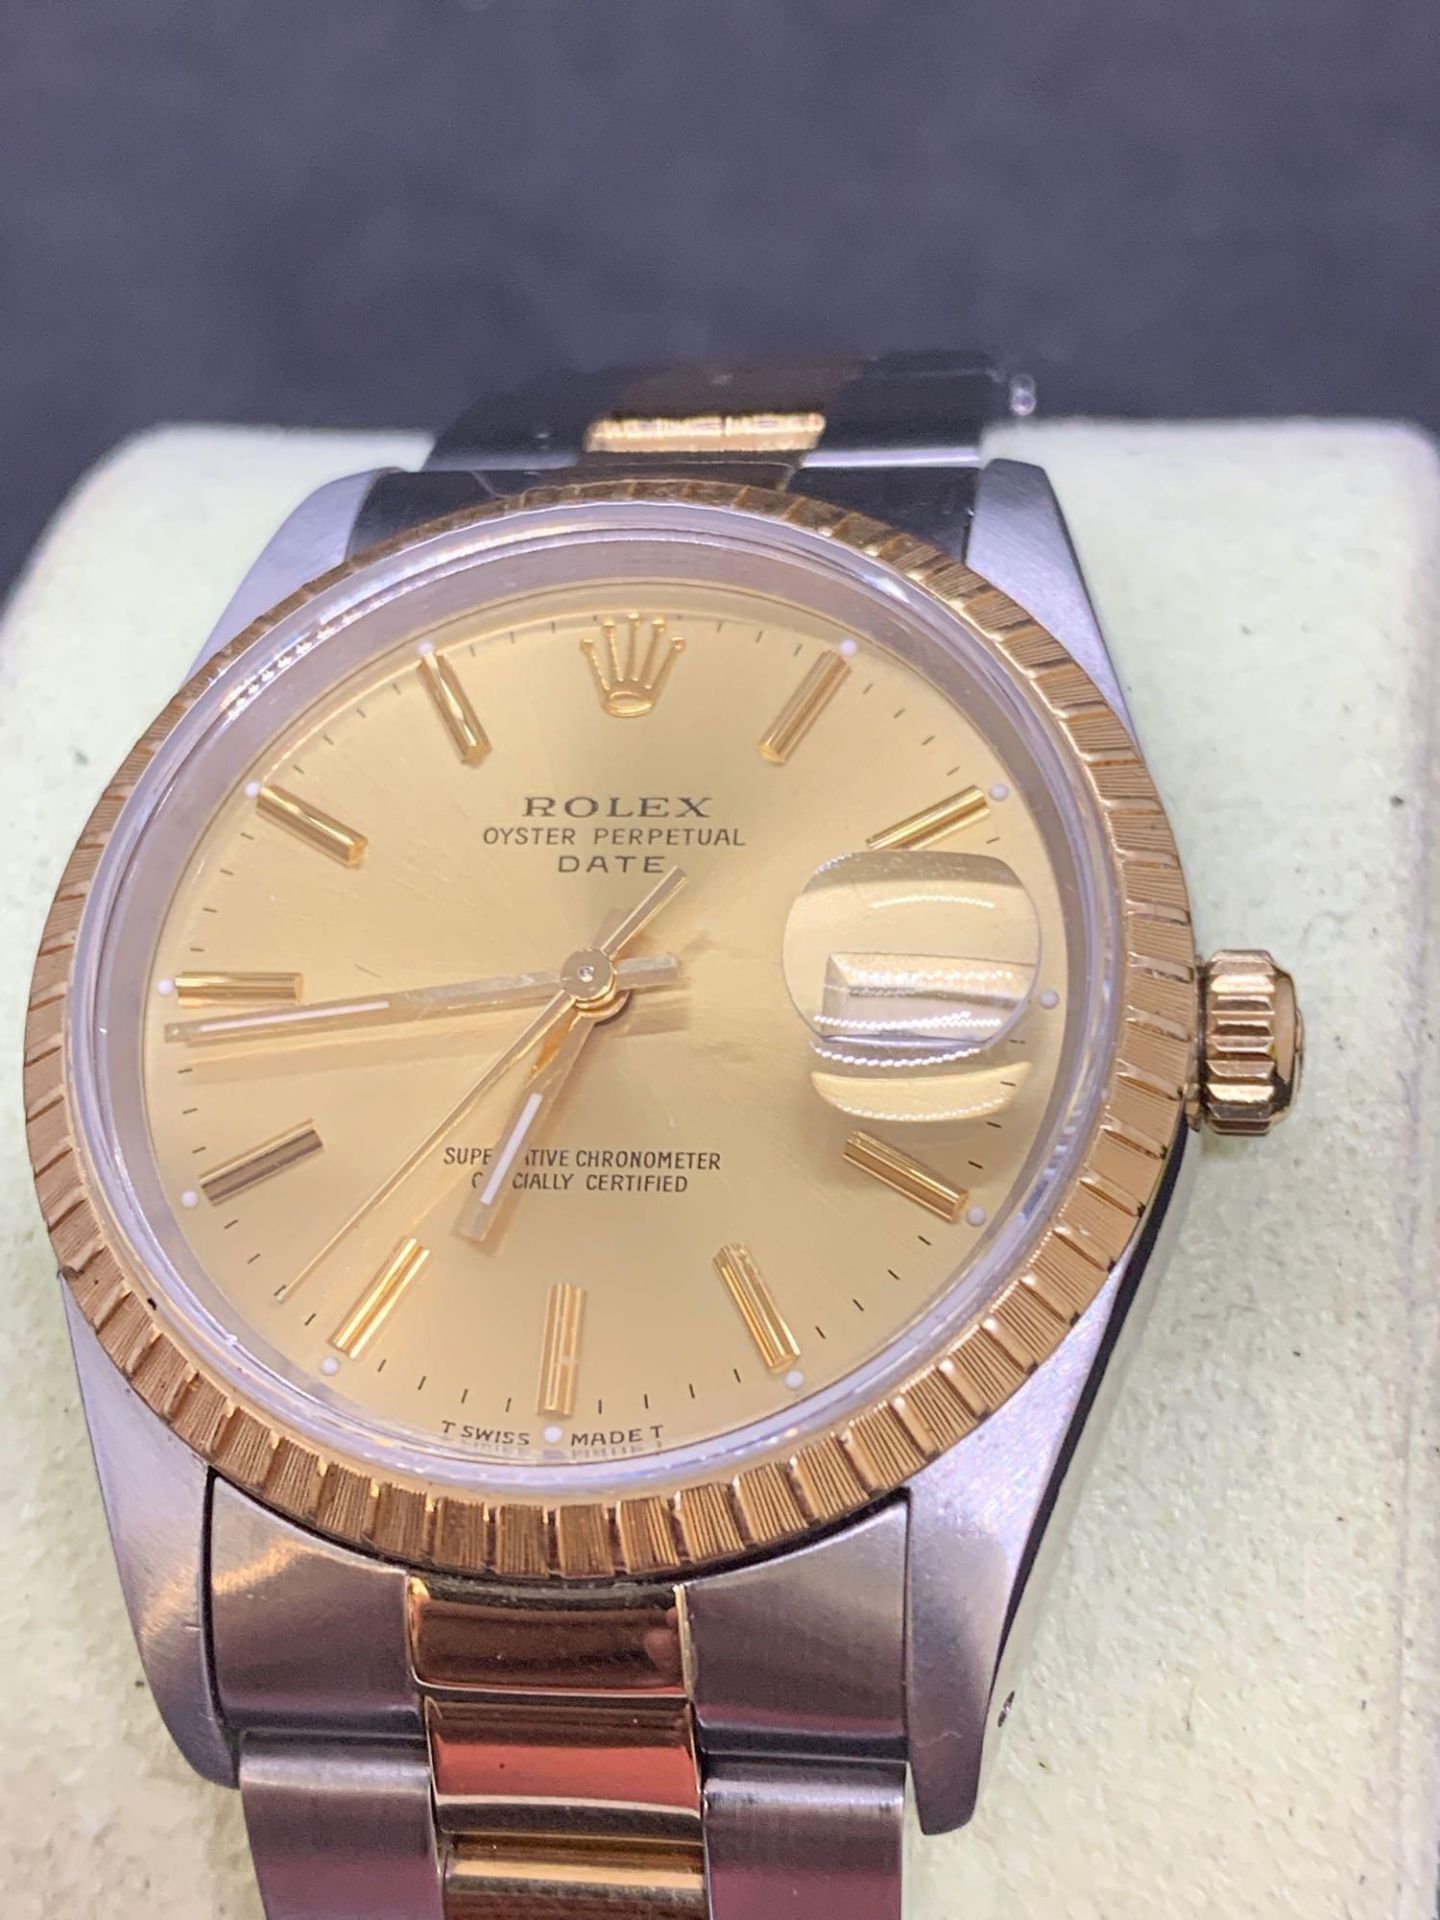 Rolex stainless steel and gold 36 mm oyster perpetual date Gents watch Oyster Bracelet - Image 2 of 7